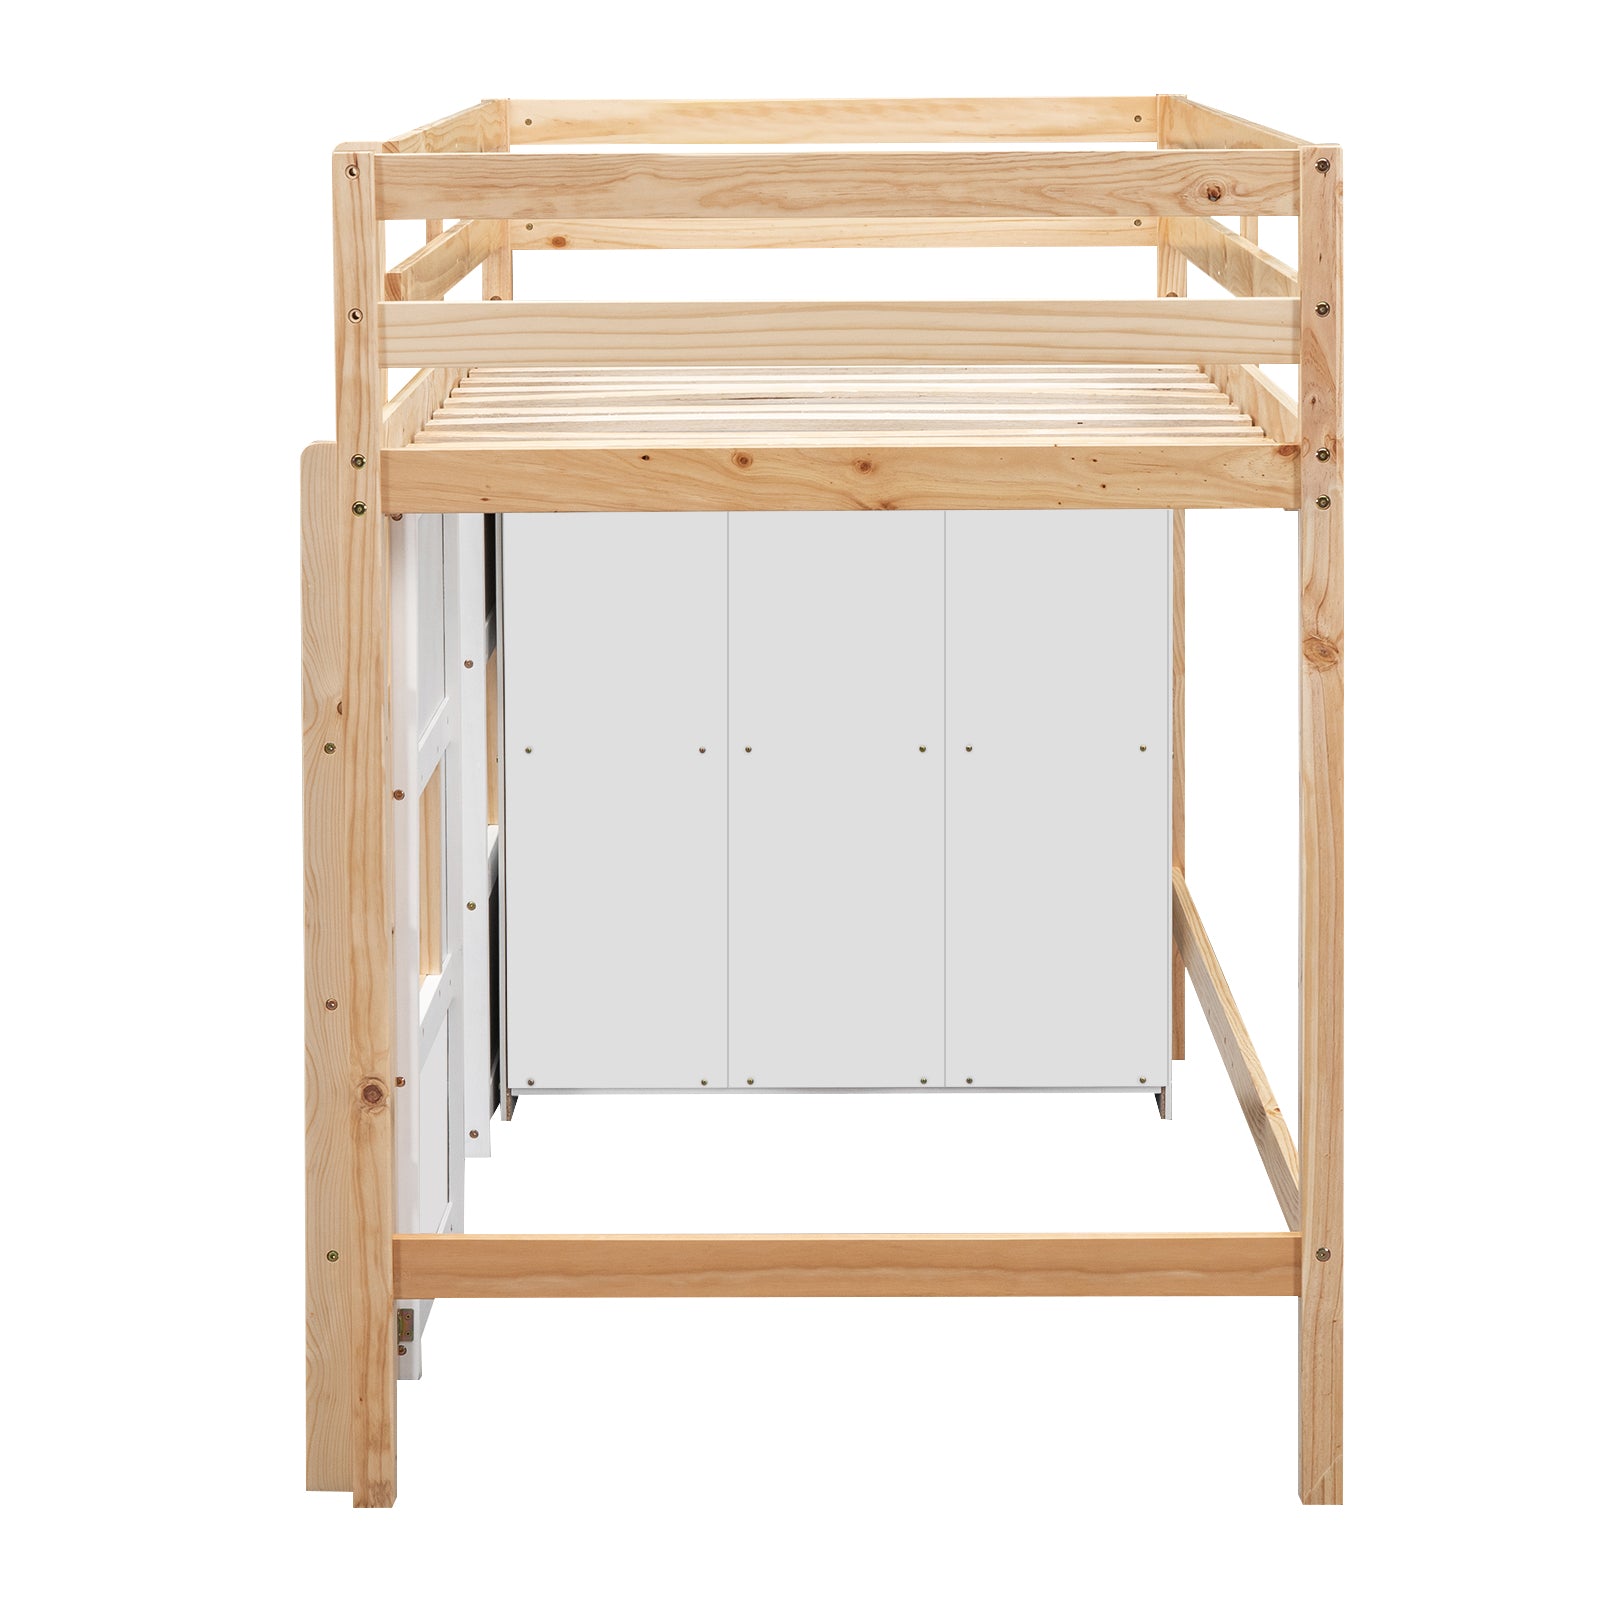 Bellemave Twin Size Wood Loft Bed with Built-in Storage Wardrobe and 2 Windows